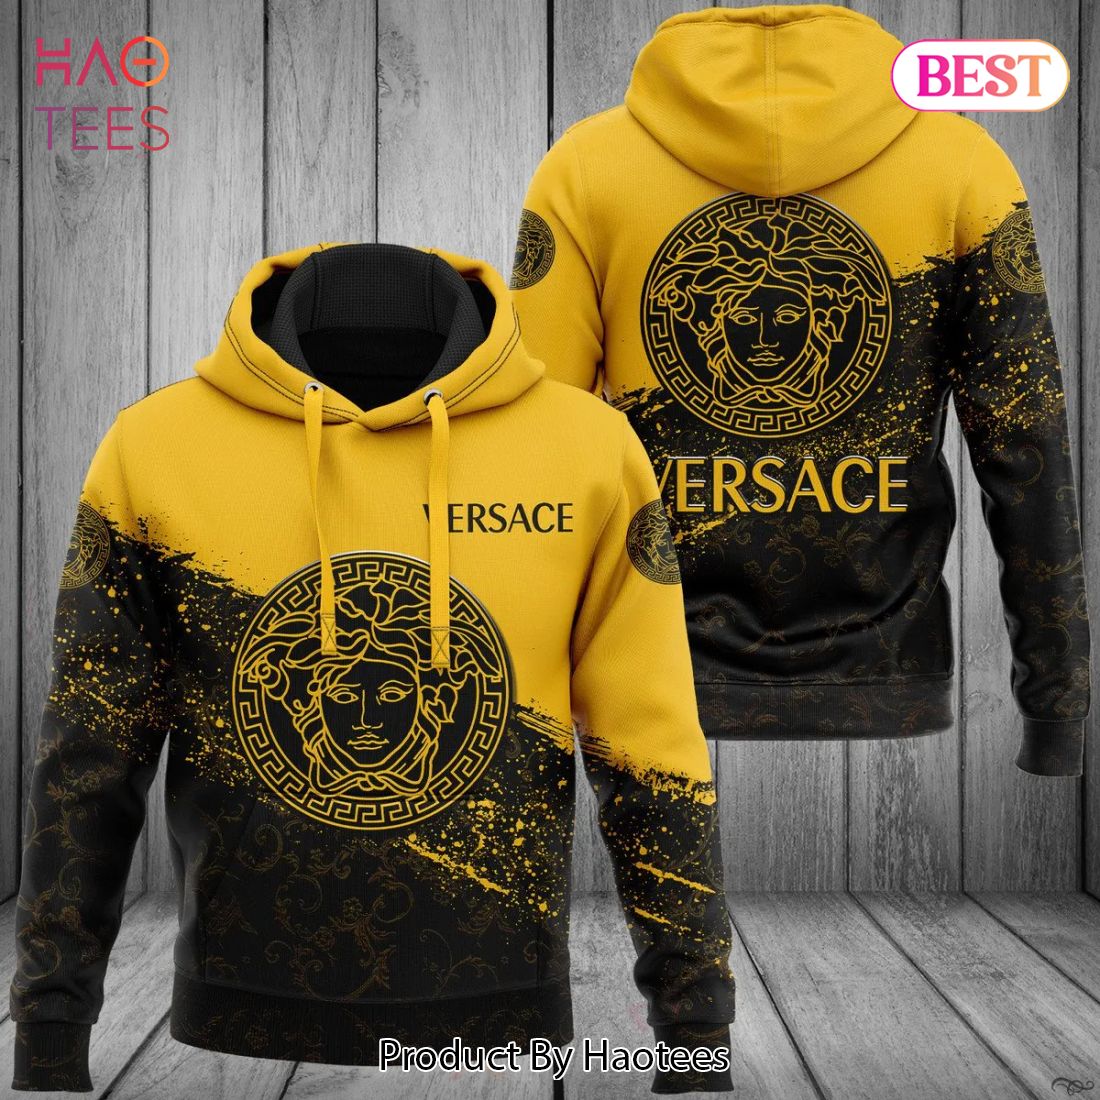 Gianni Versace Unisex Hoodie For Men Women Luxury Brand Clothing Clothes Outfit